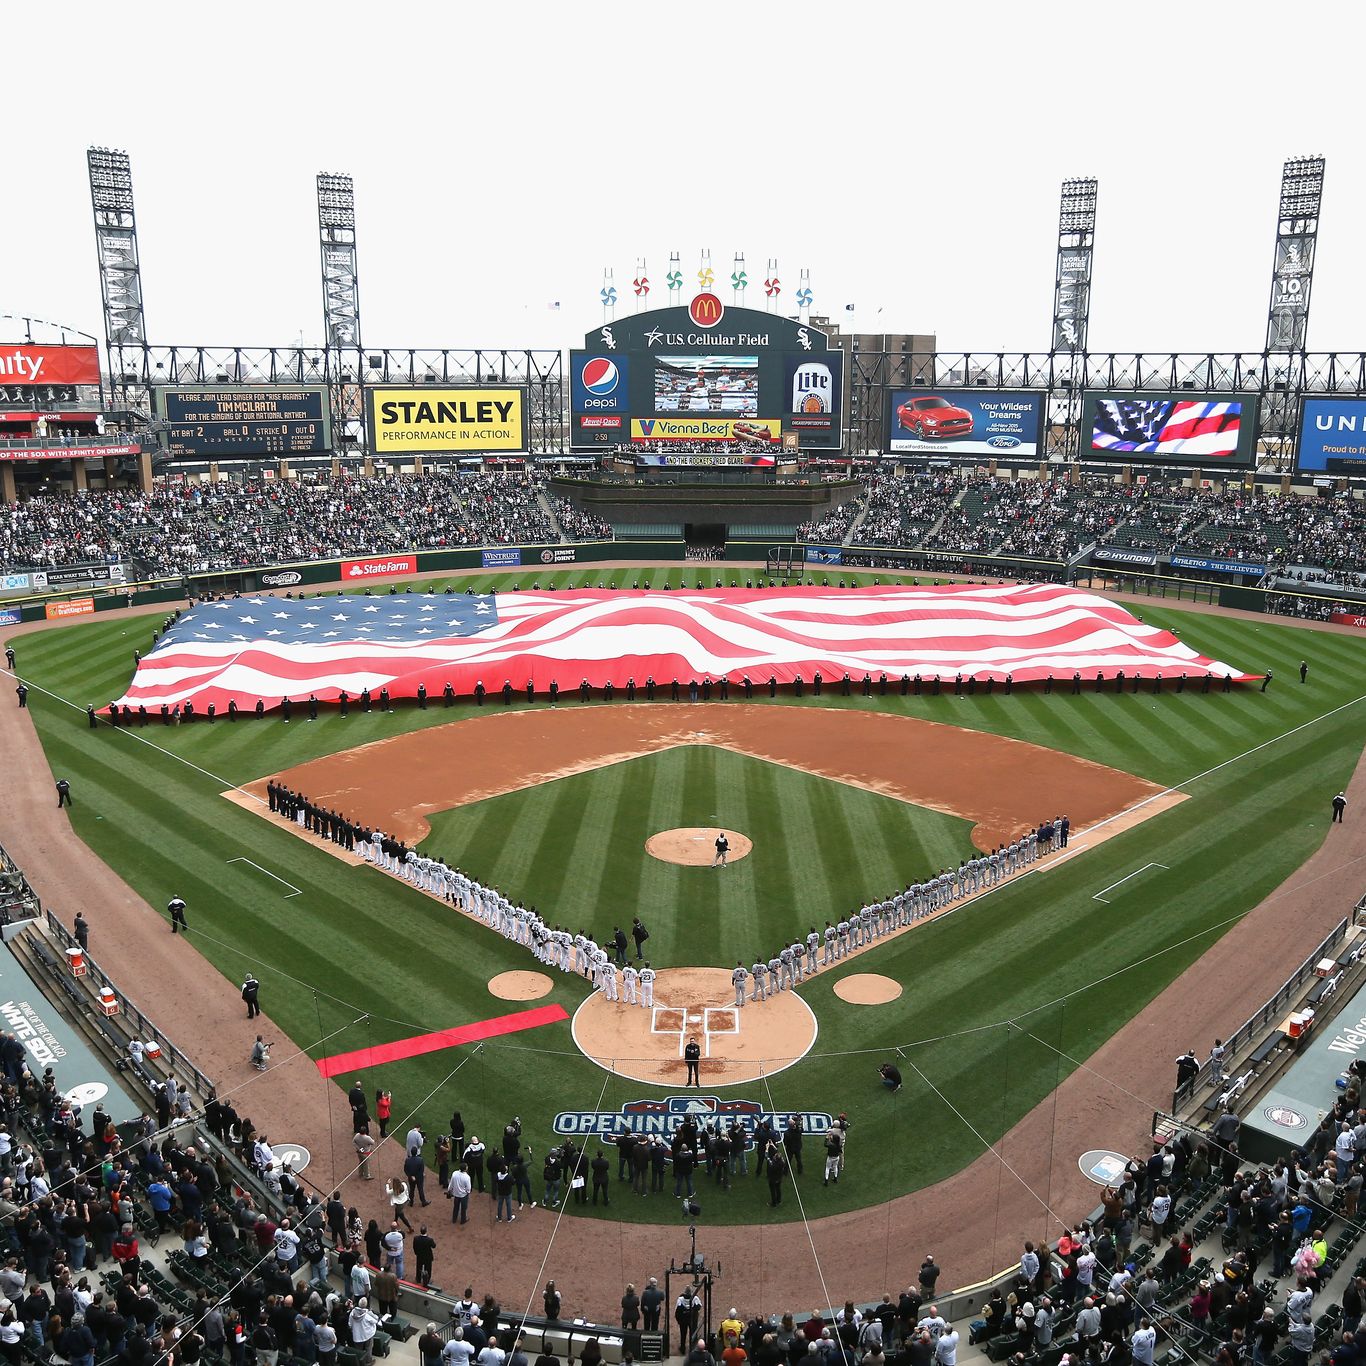 Column: Chicago White Sox home opener is one to forget